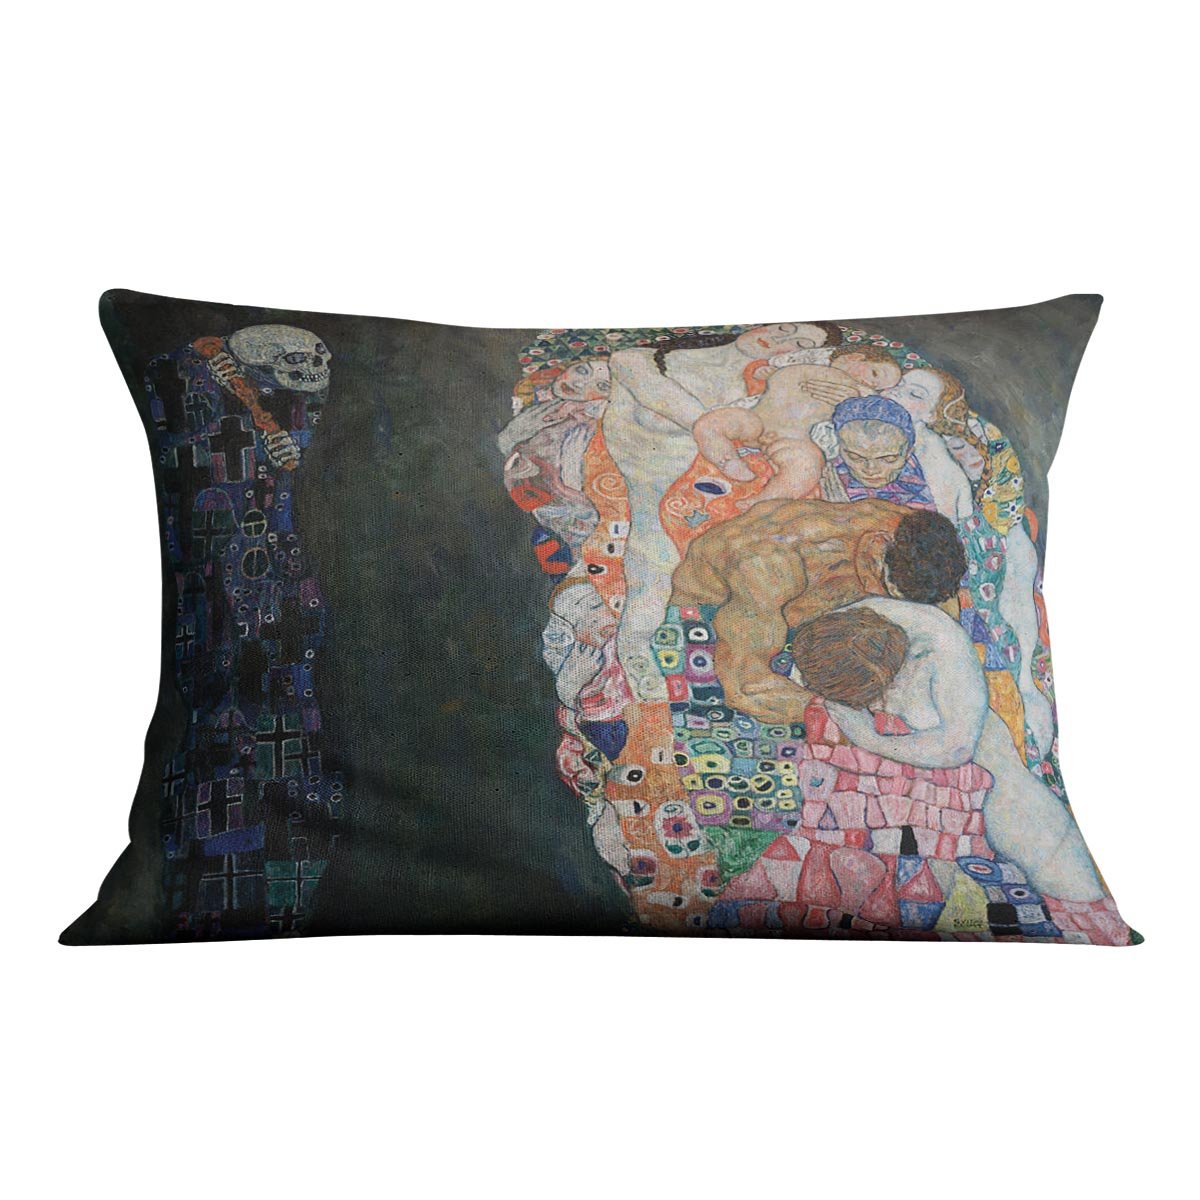 Death and Life by Klimt 2 Throw Pillow